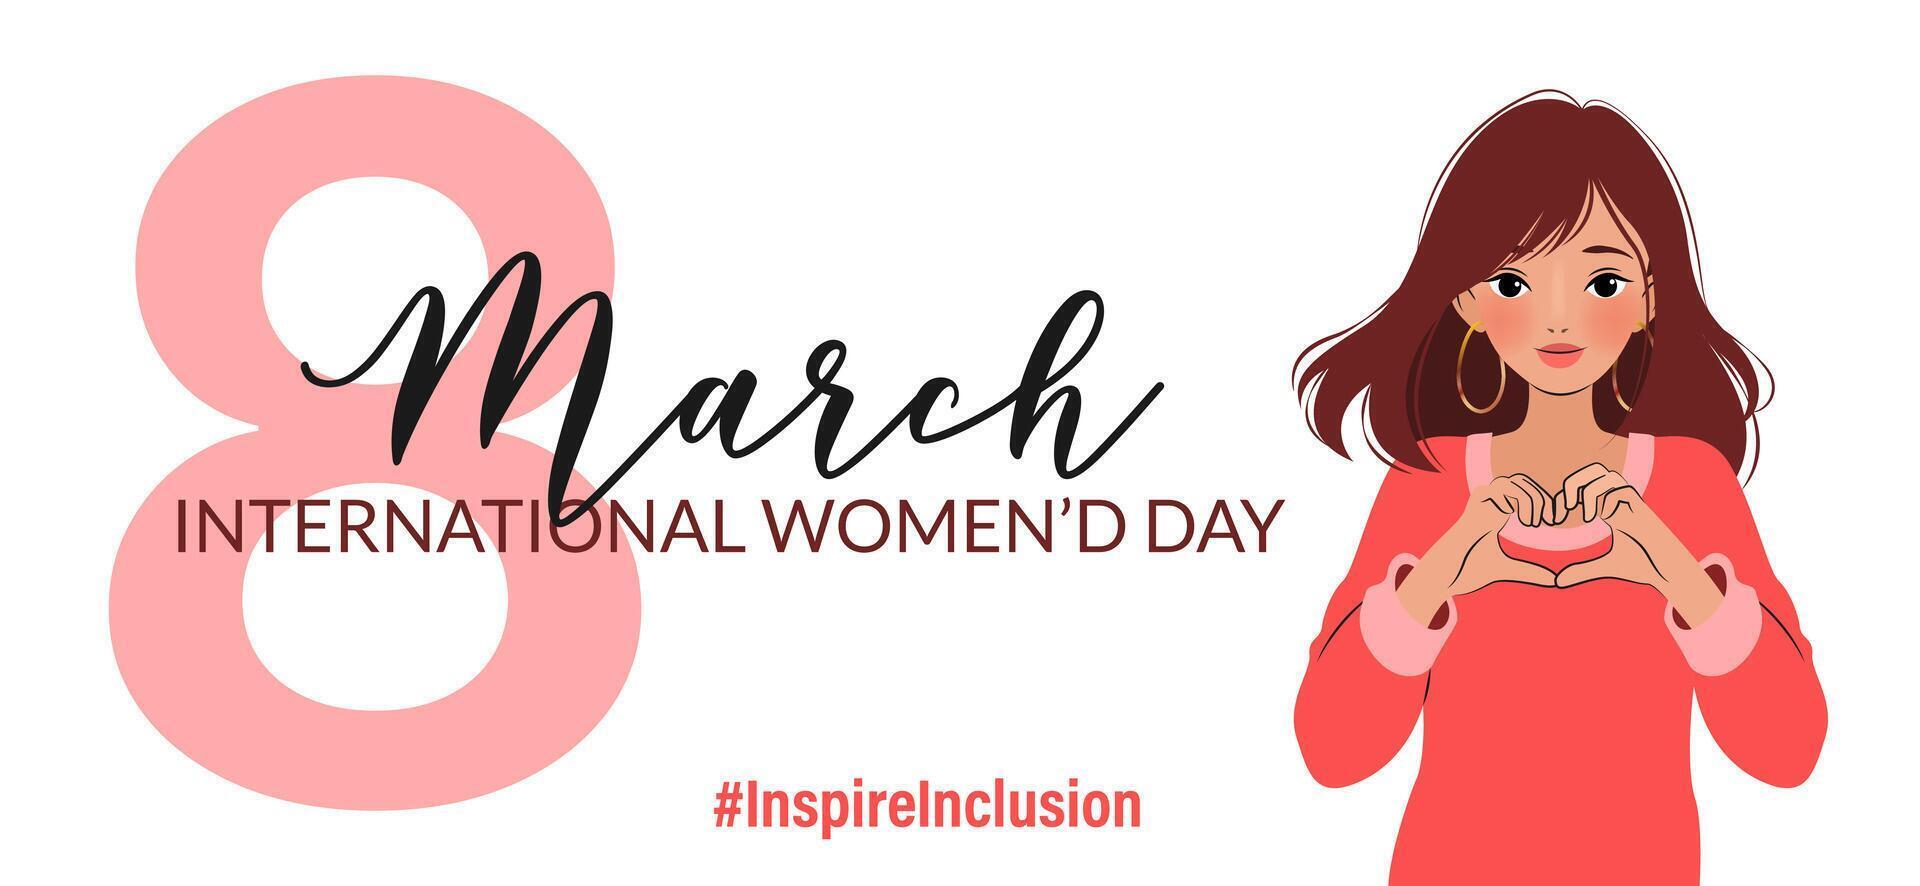 Inspireinclusion. 2024 International Women's Day. 8 March horizontal banner. Woman showing sign of heart with her hands. Design for poster, campaign, social media post. Vector illustration, background